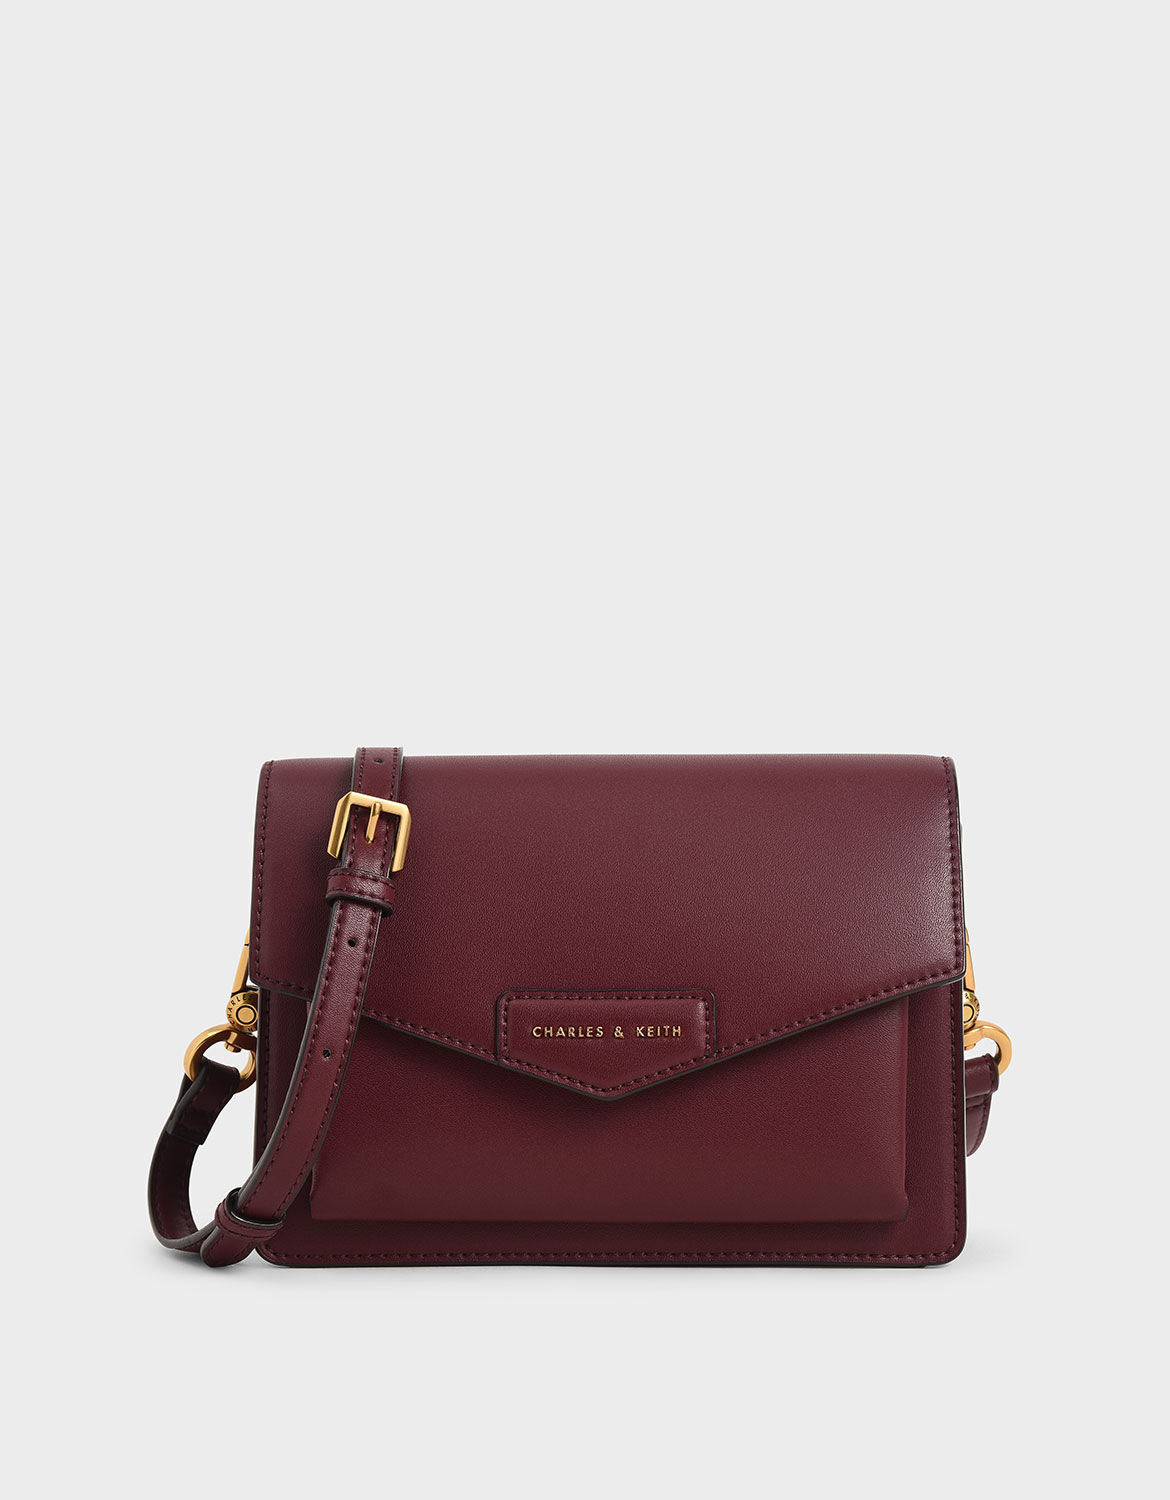 Women's Italian Leather Crossbody Bag in Burgundy by Quince